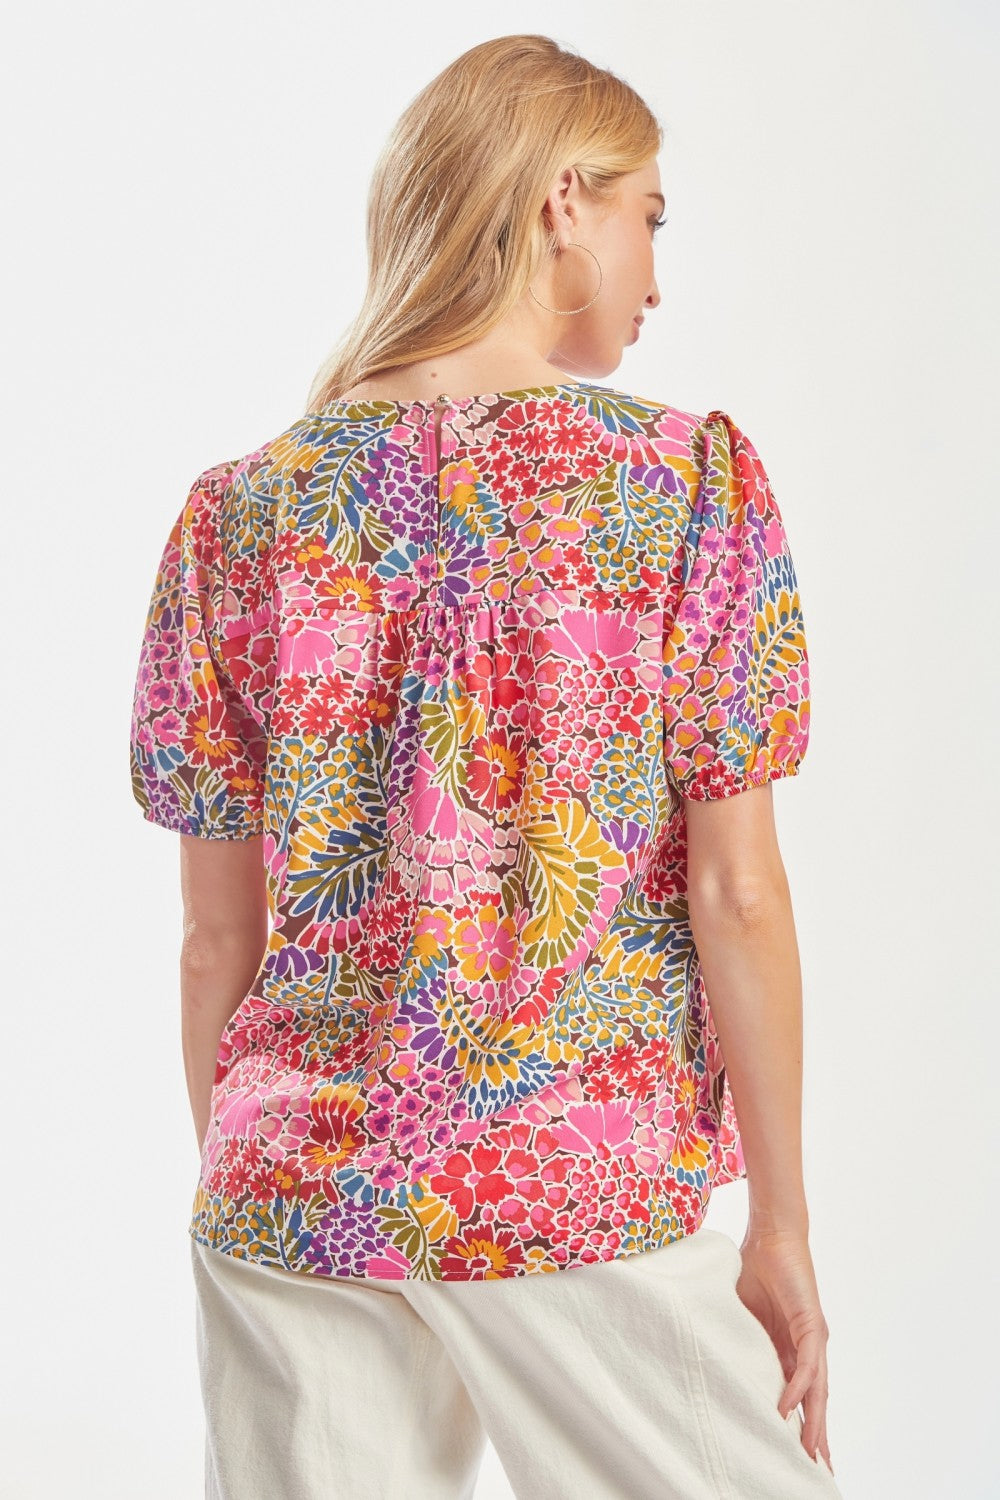 It's a Beautiful Summer Day Embroidered Top